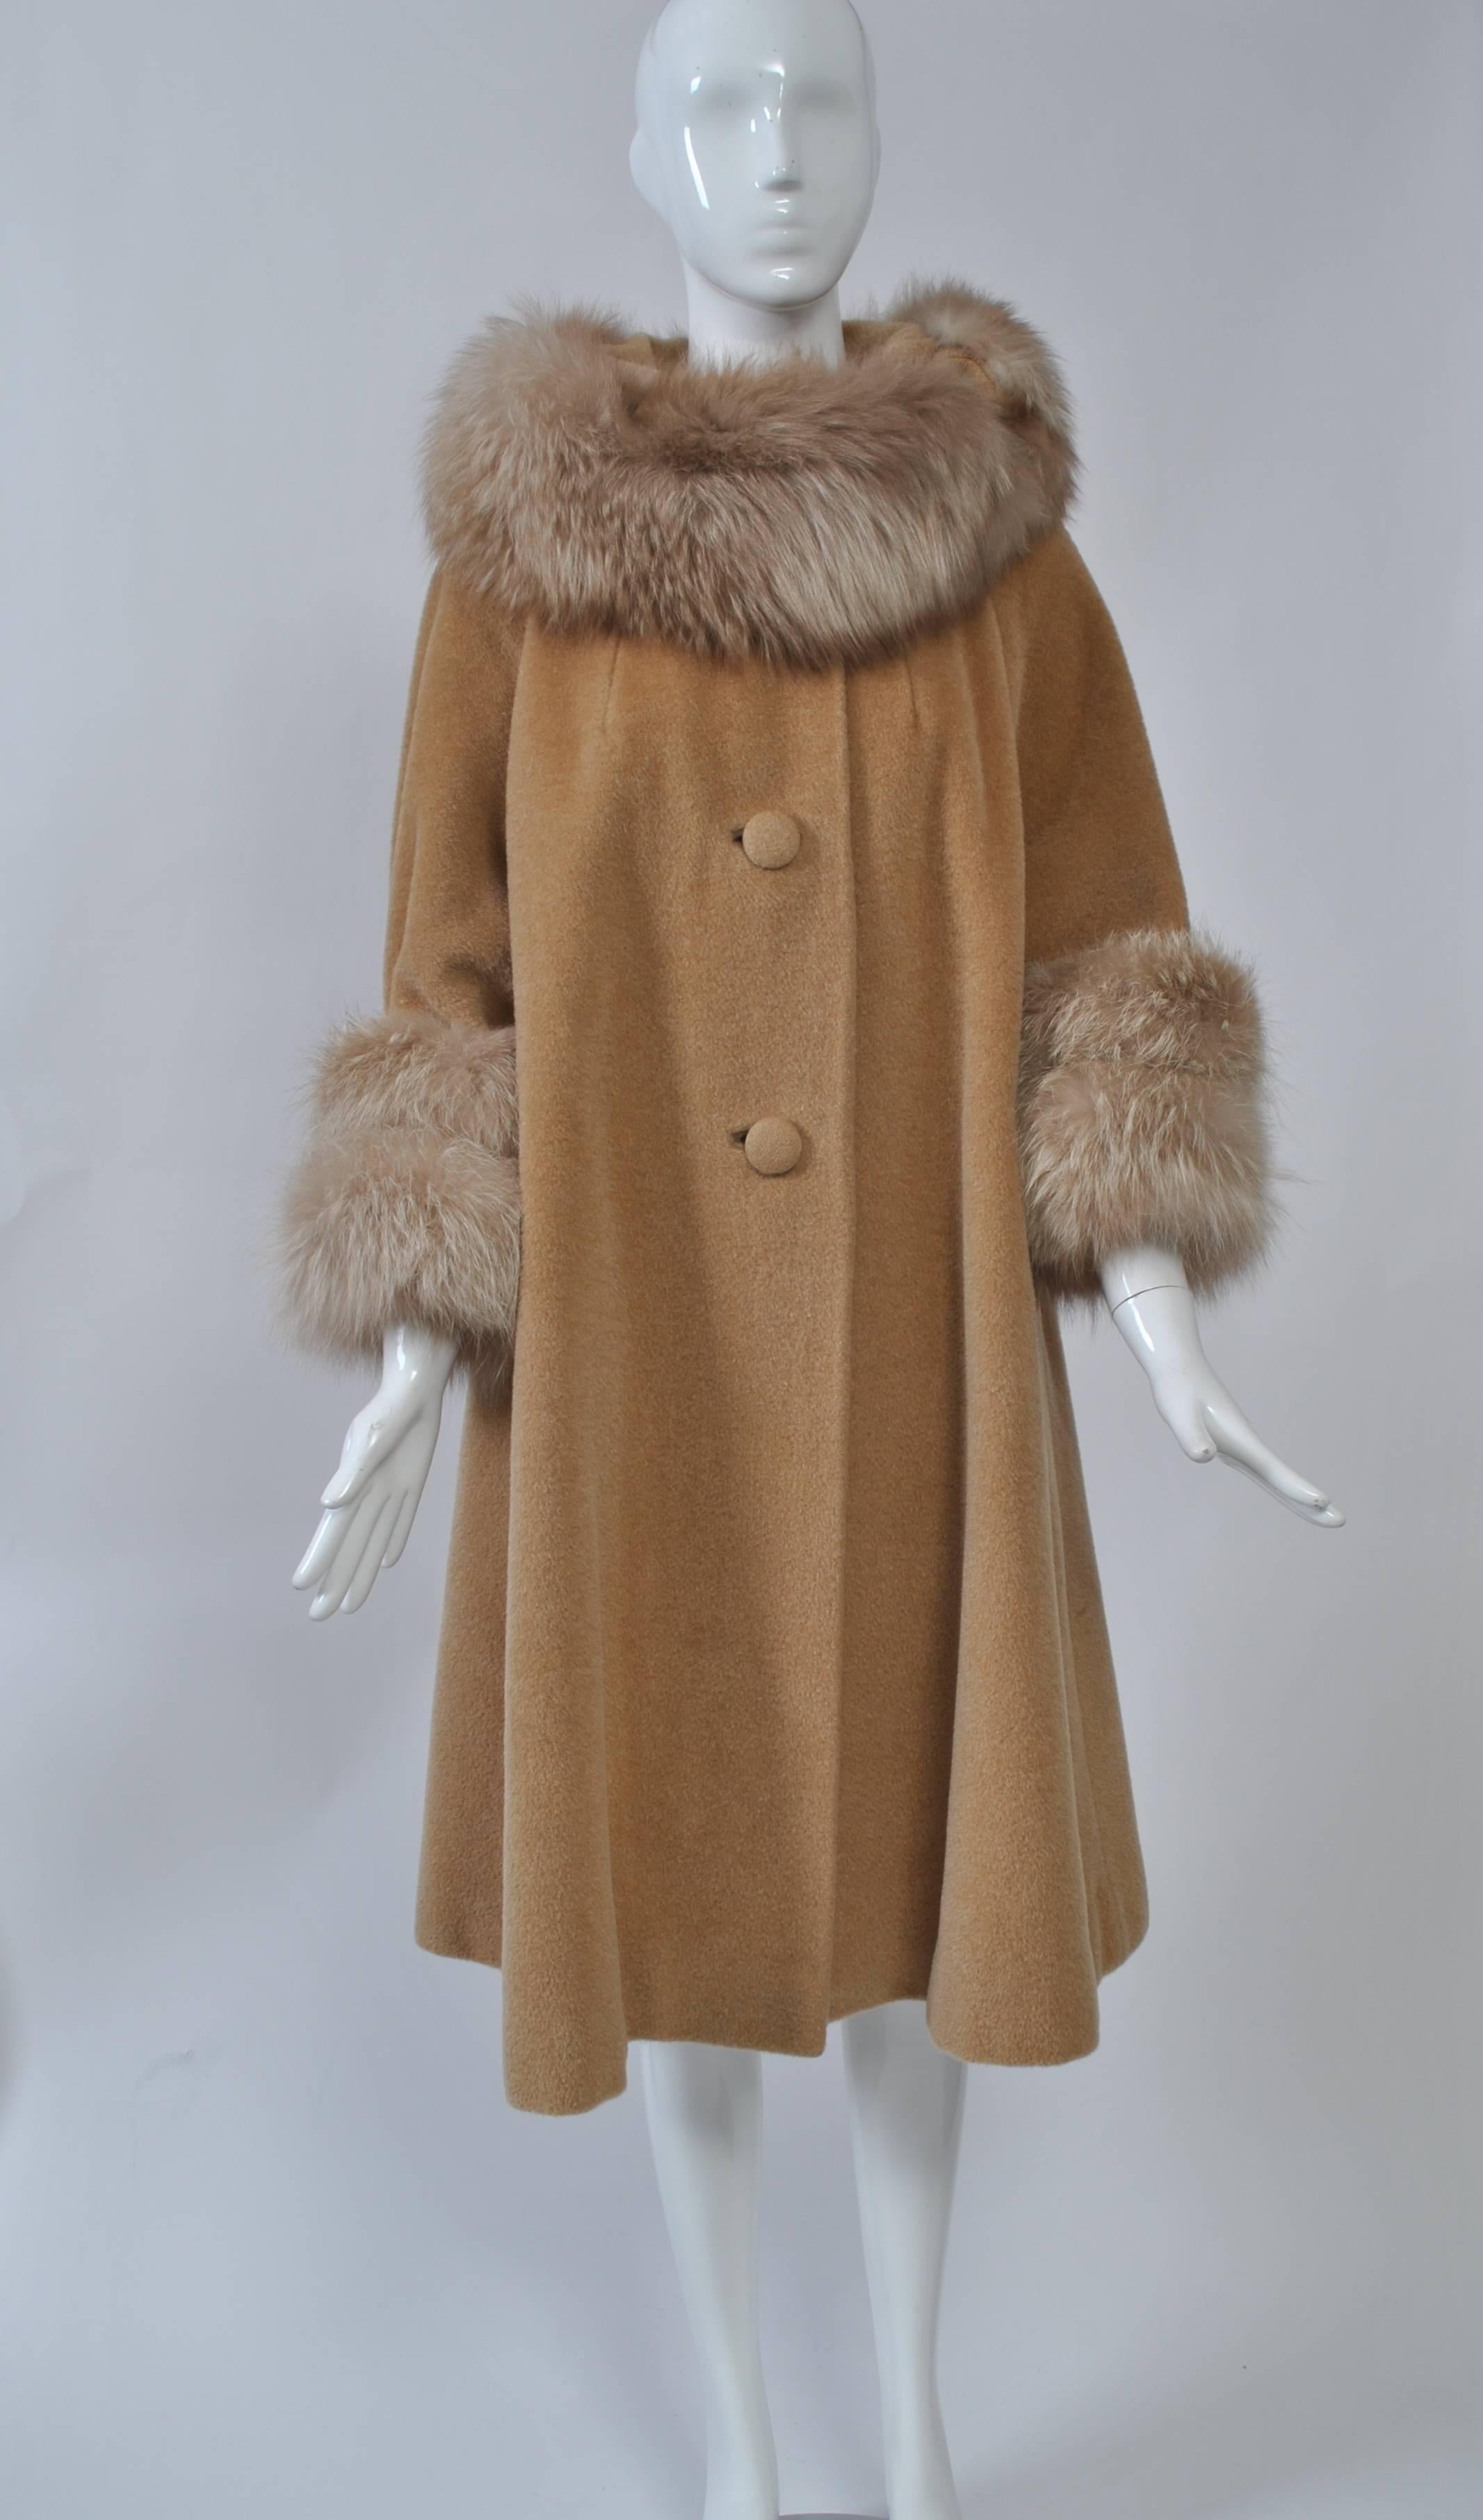 Lilli Ann produced some of the best and most sought-after coats and suits in mid-century America, most influenced by Hollywood drama. This coat is exemplary of the company's flair for drama and its use of luxurious fabrics, most imported from